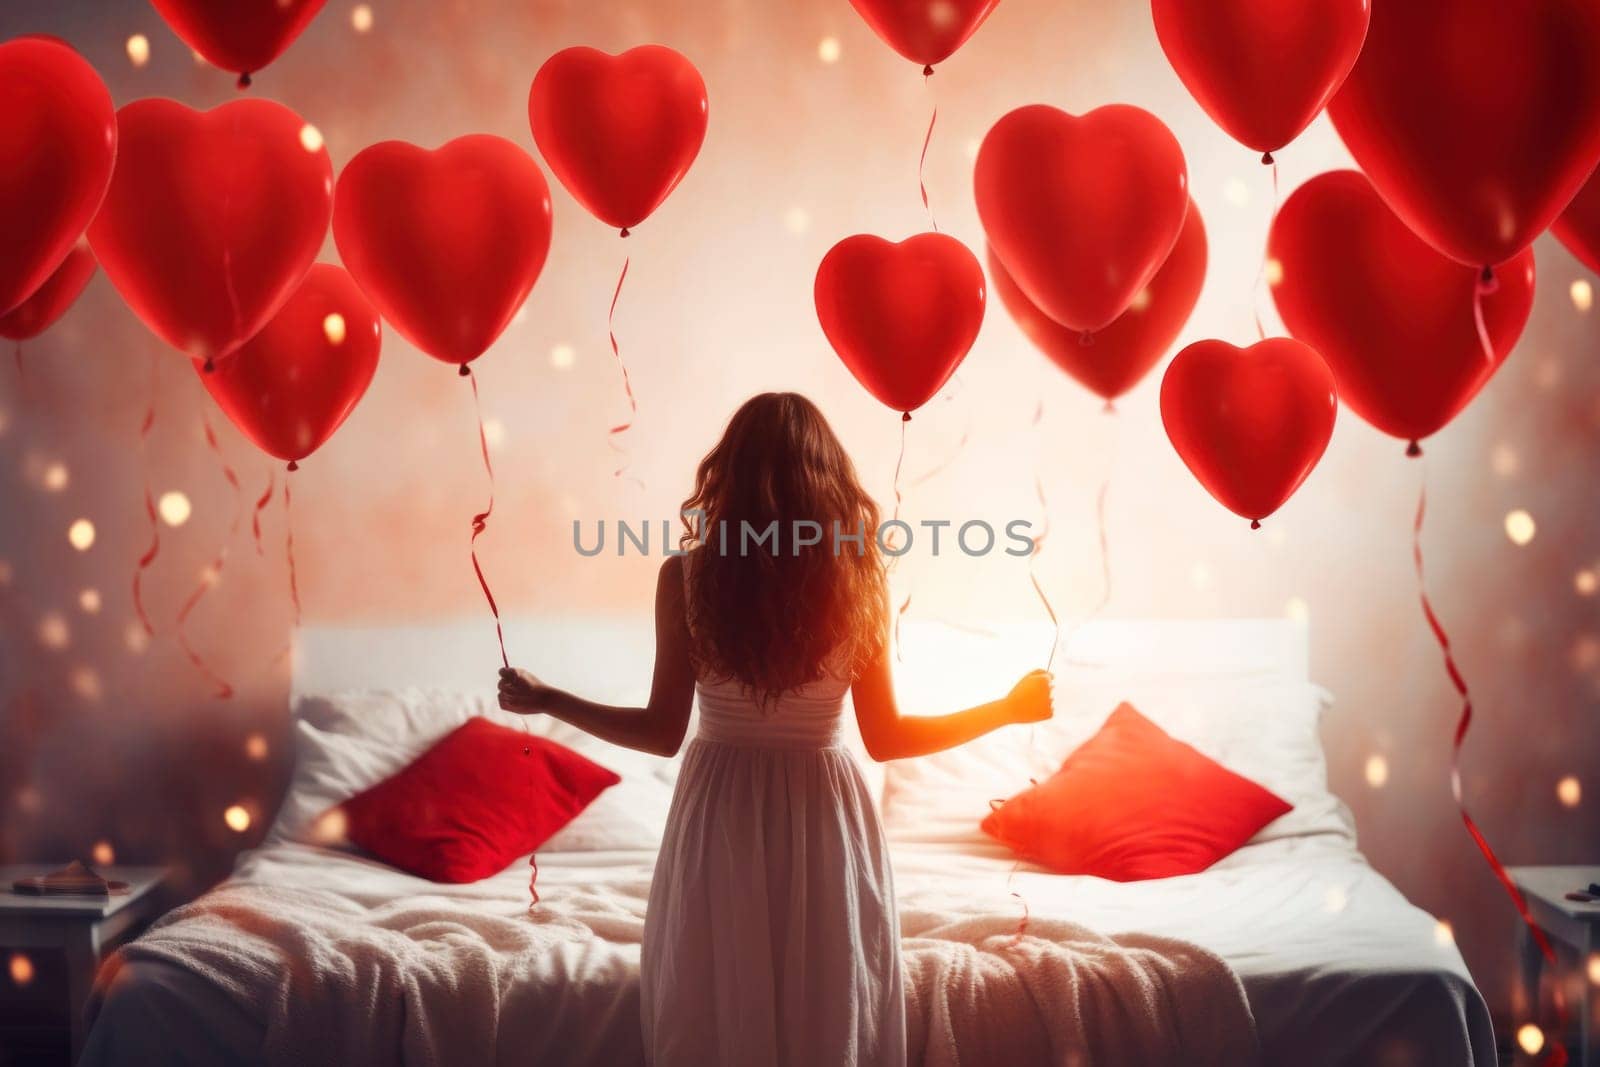 A happy woman enjoys a love-filled moment in a bedroom with heart-shaped balloons